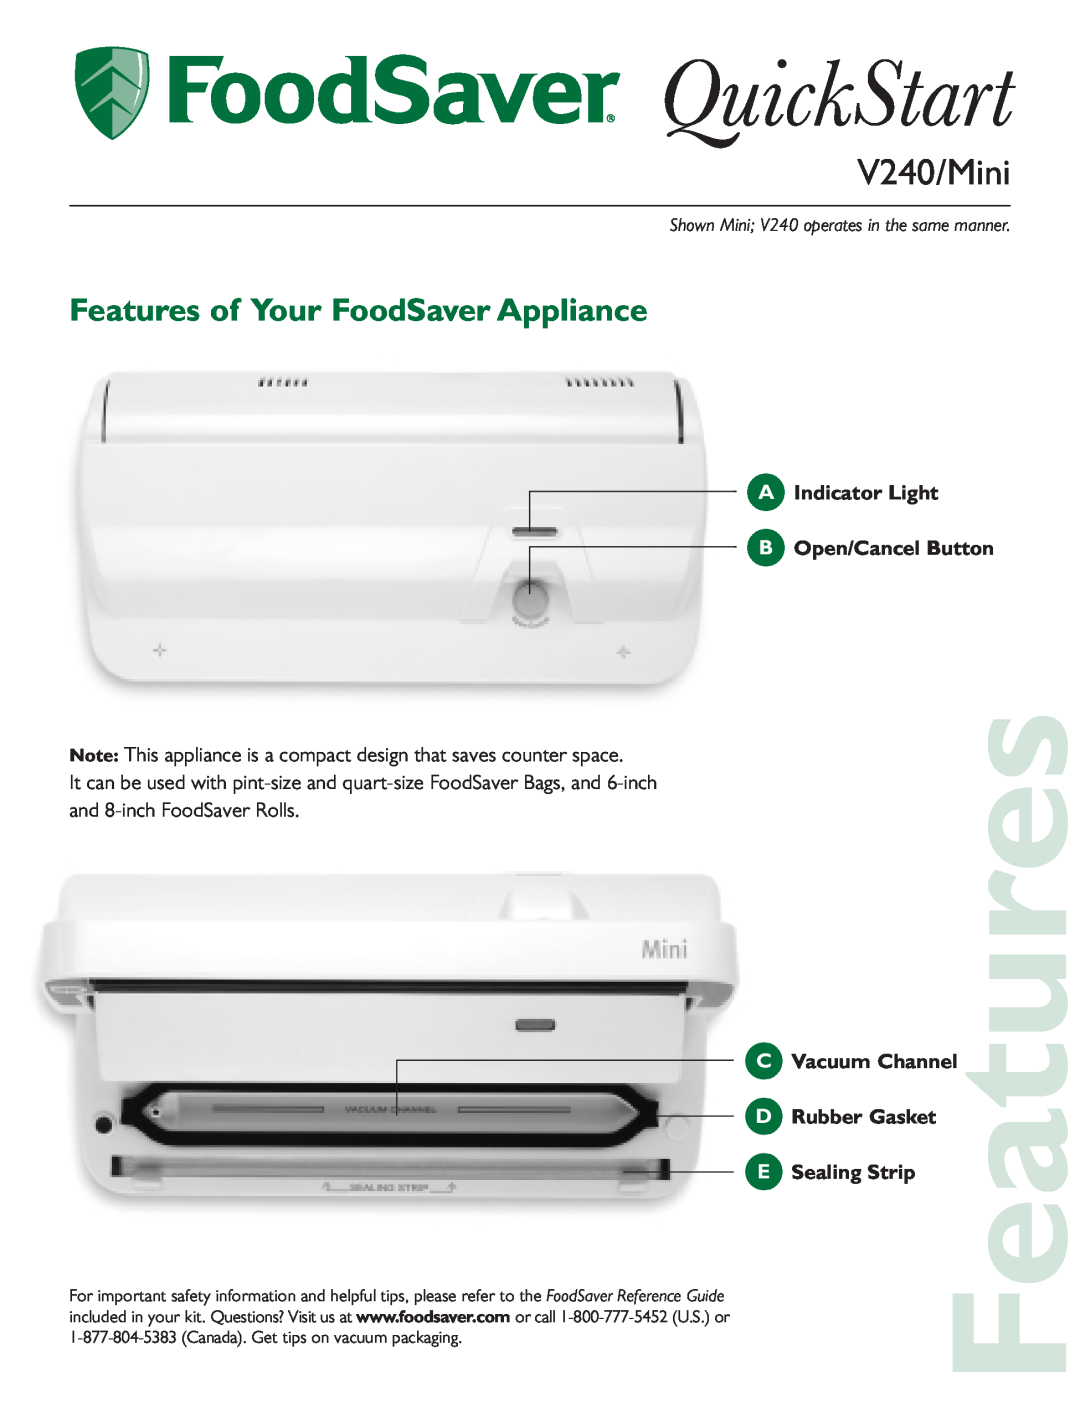 FoodSaver quick start Features of Your FoodSaver Appliance, Shown Mini V240 operates in the same manner, QuickStart 